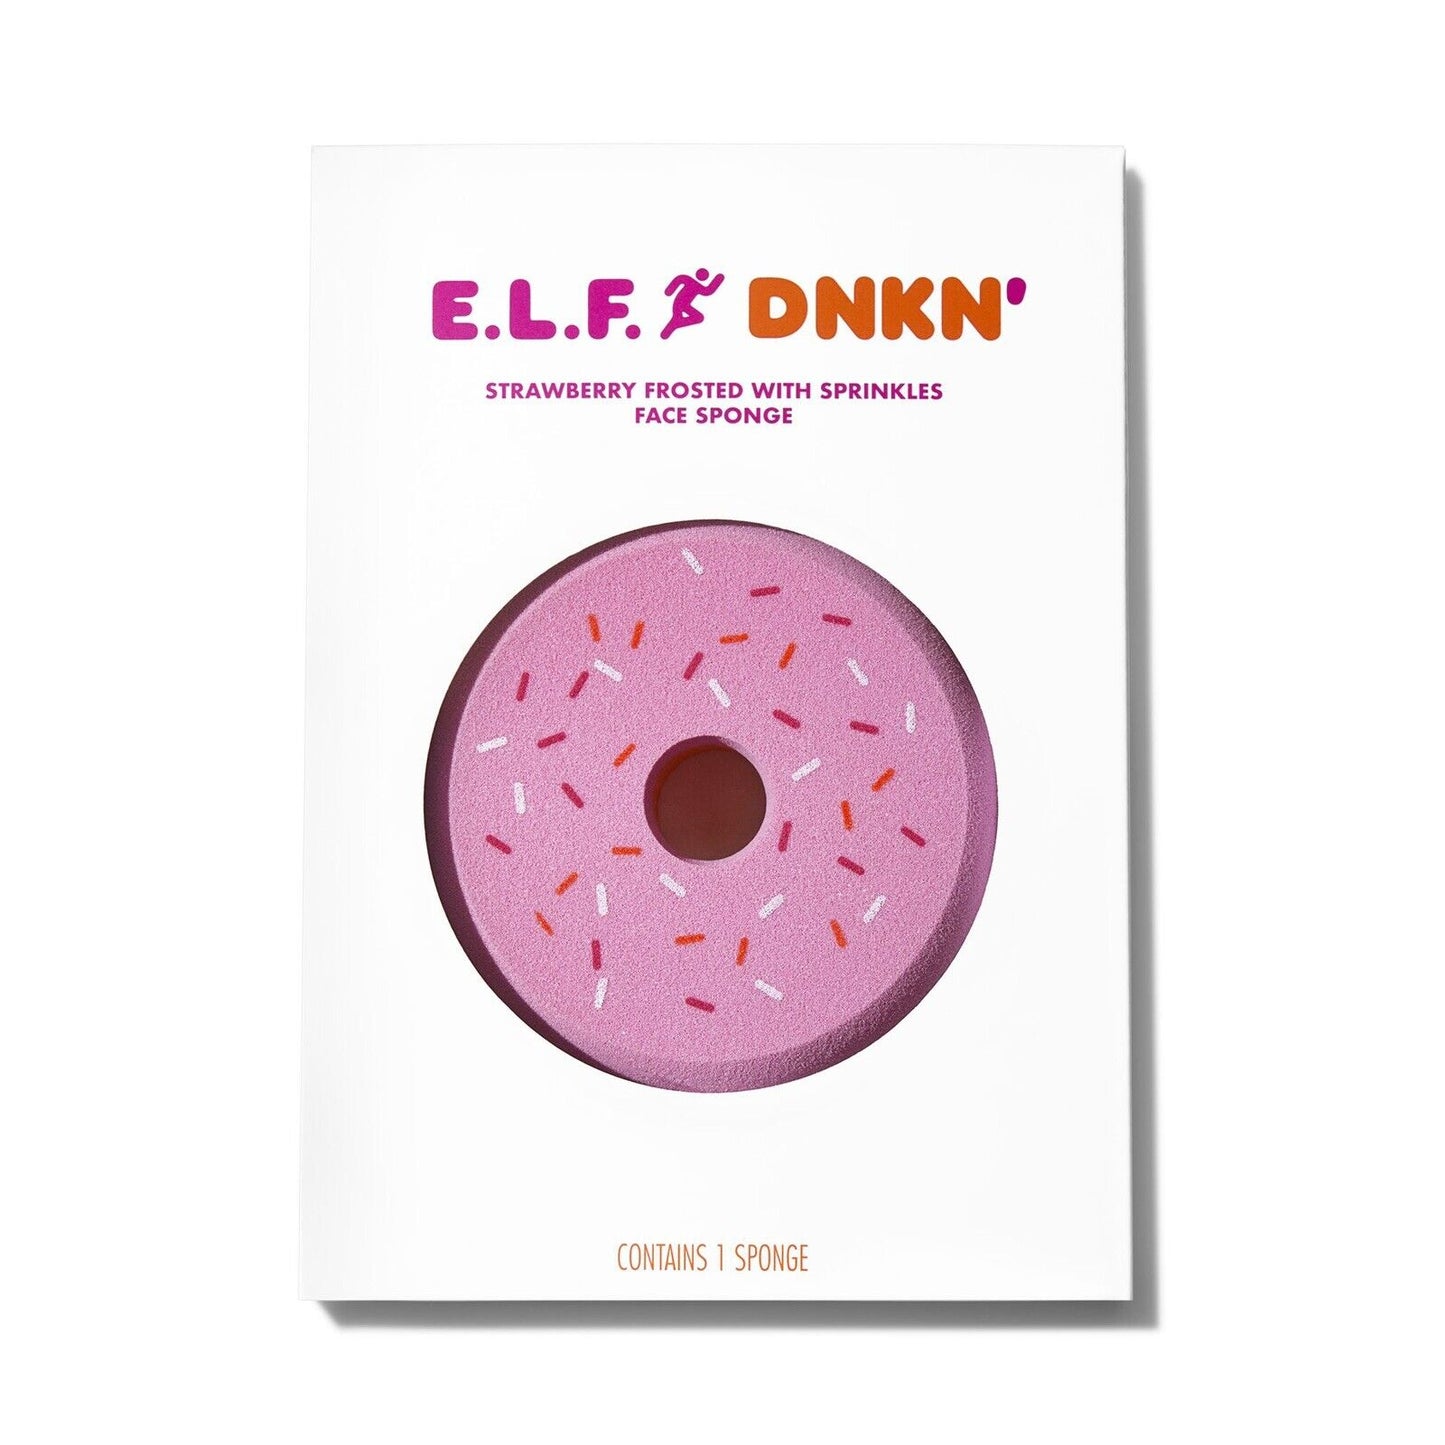 e.l.f x DNKN' Strawberry Frosted With Sprinkles Face Sponge